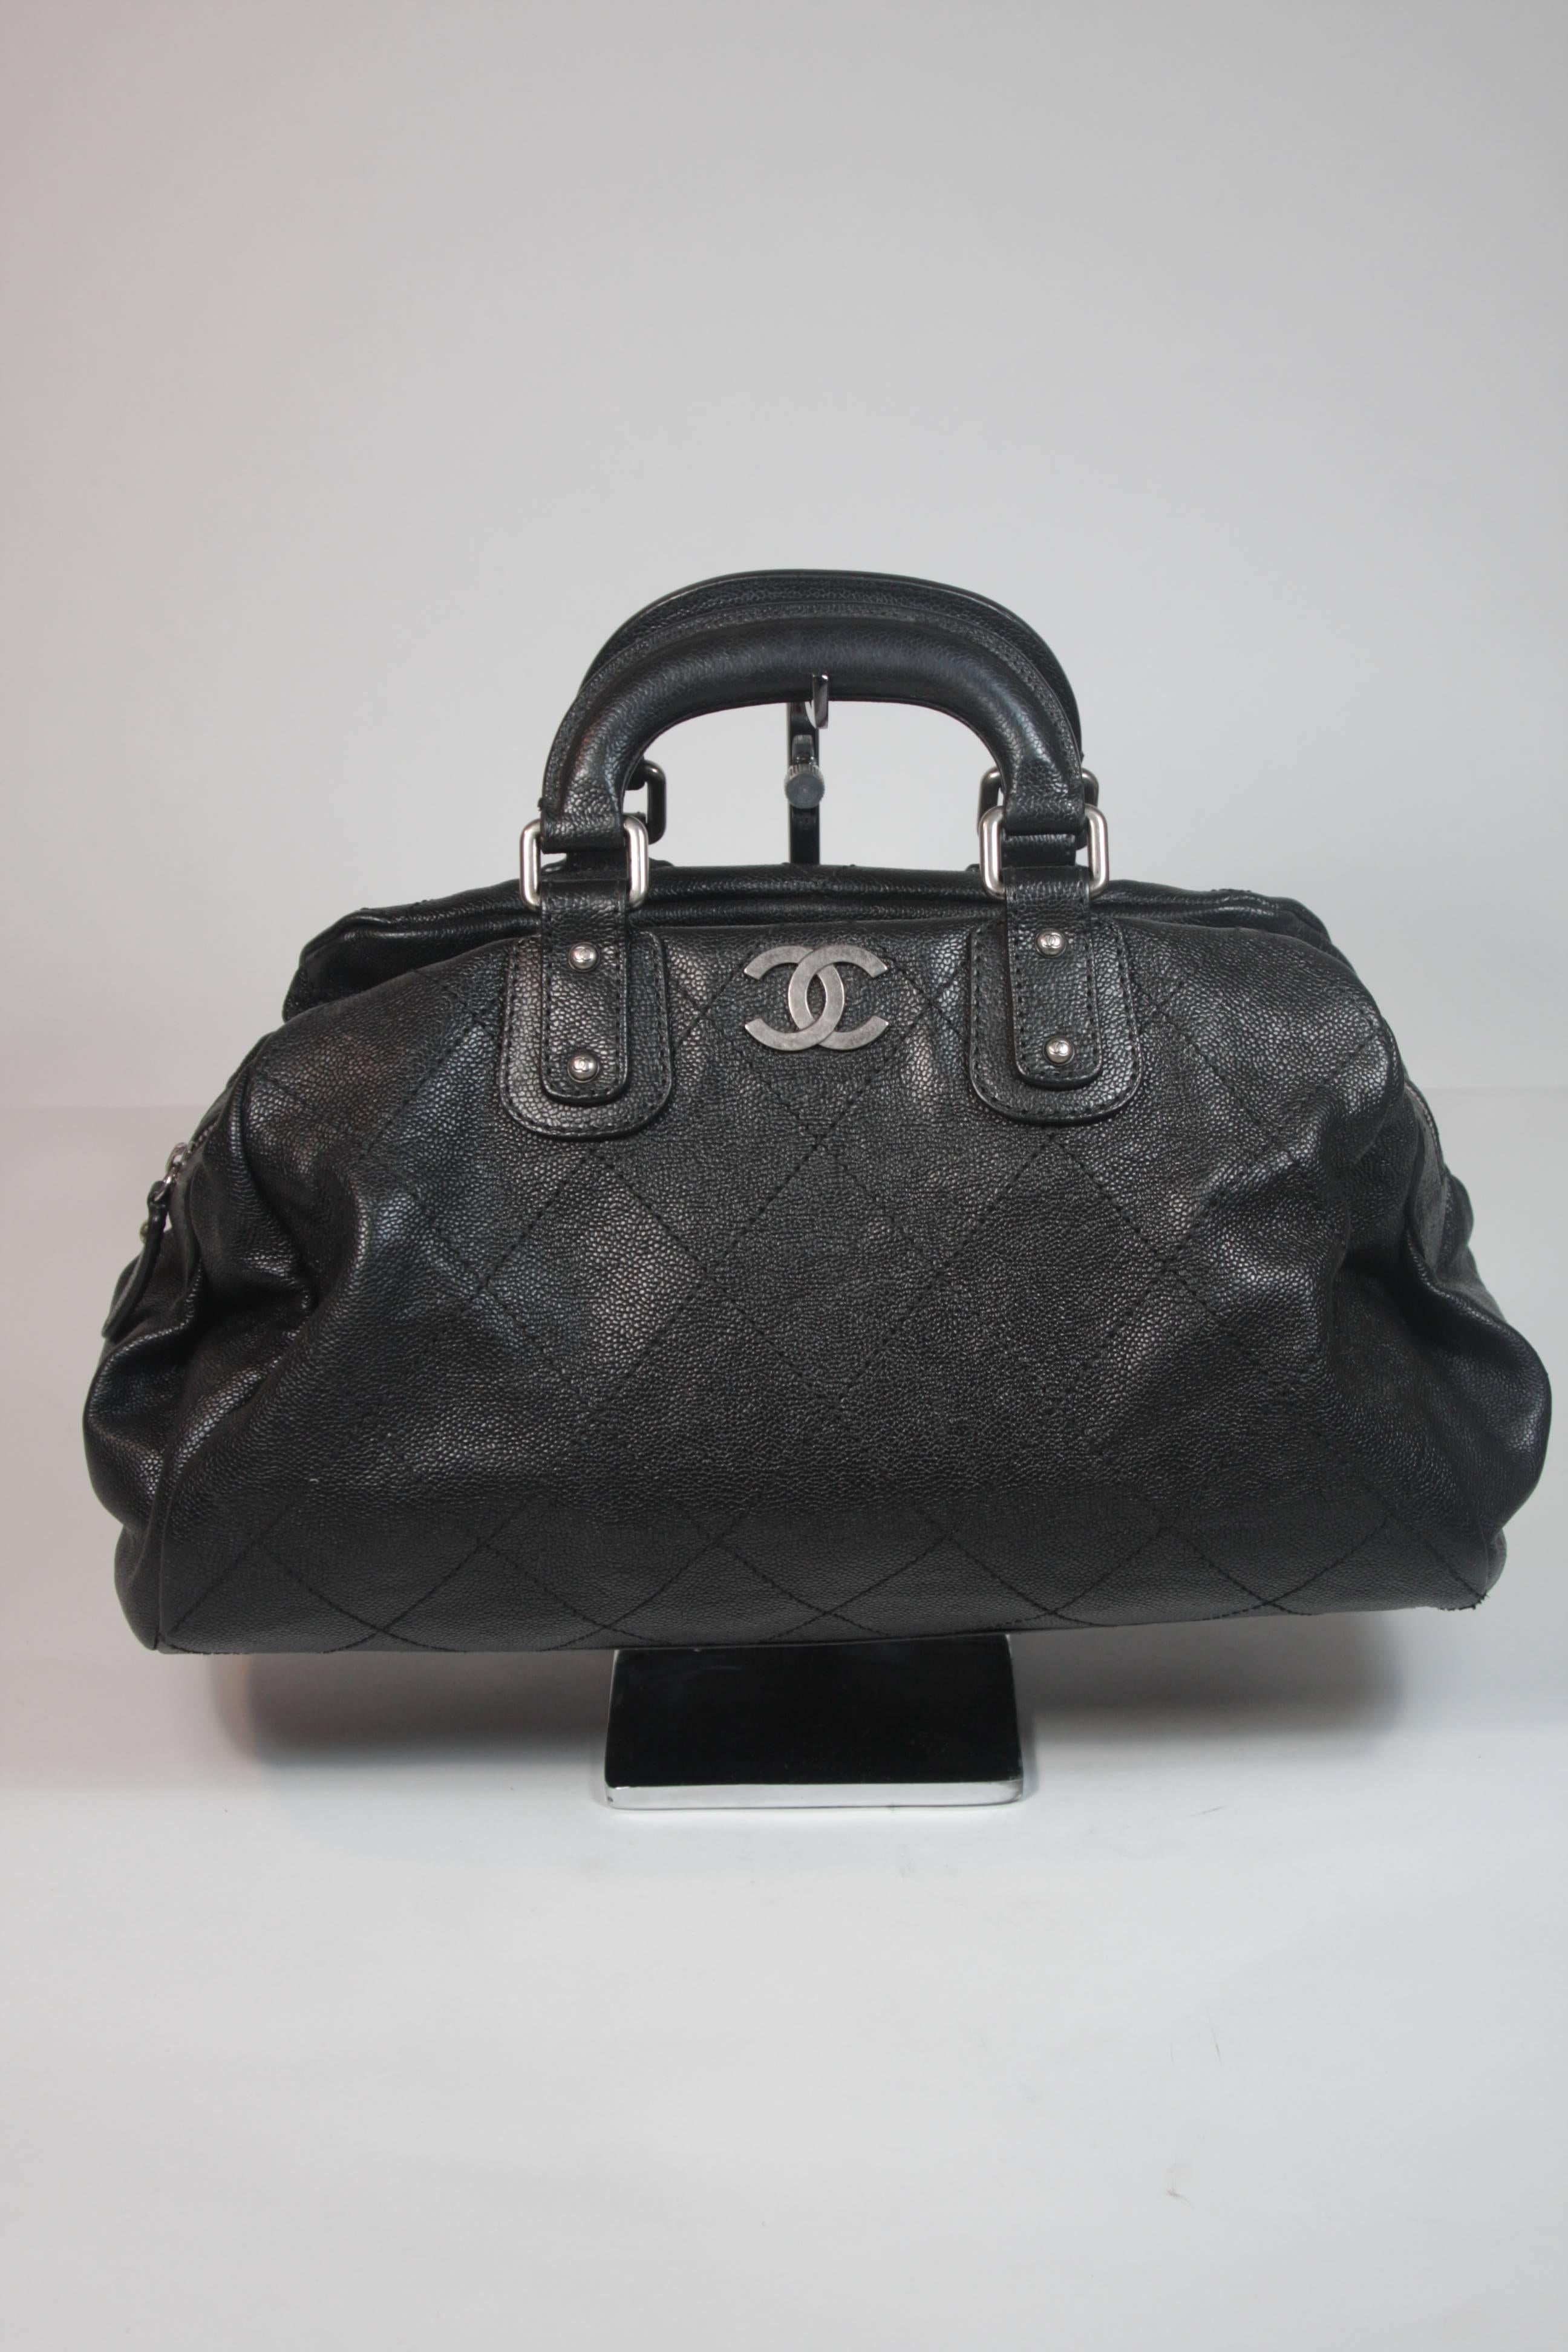 This Chanel handbag is composed of a black Caviar leather and features silver hardware with a zipper closure. In excellent condition. 

**Please cross-reference measurements for personal accuracy.

Measurements (Approximately)  
Length: